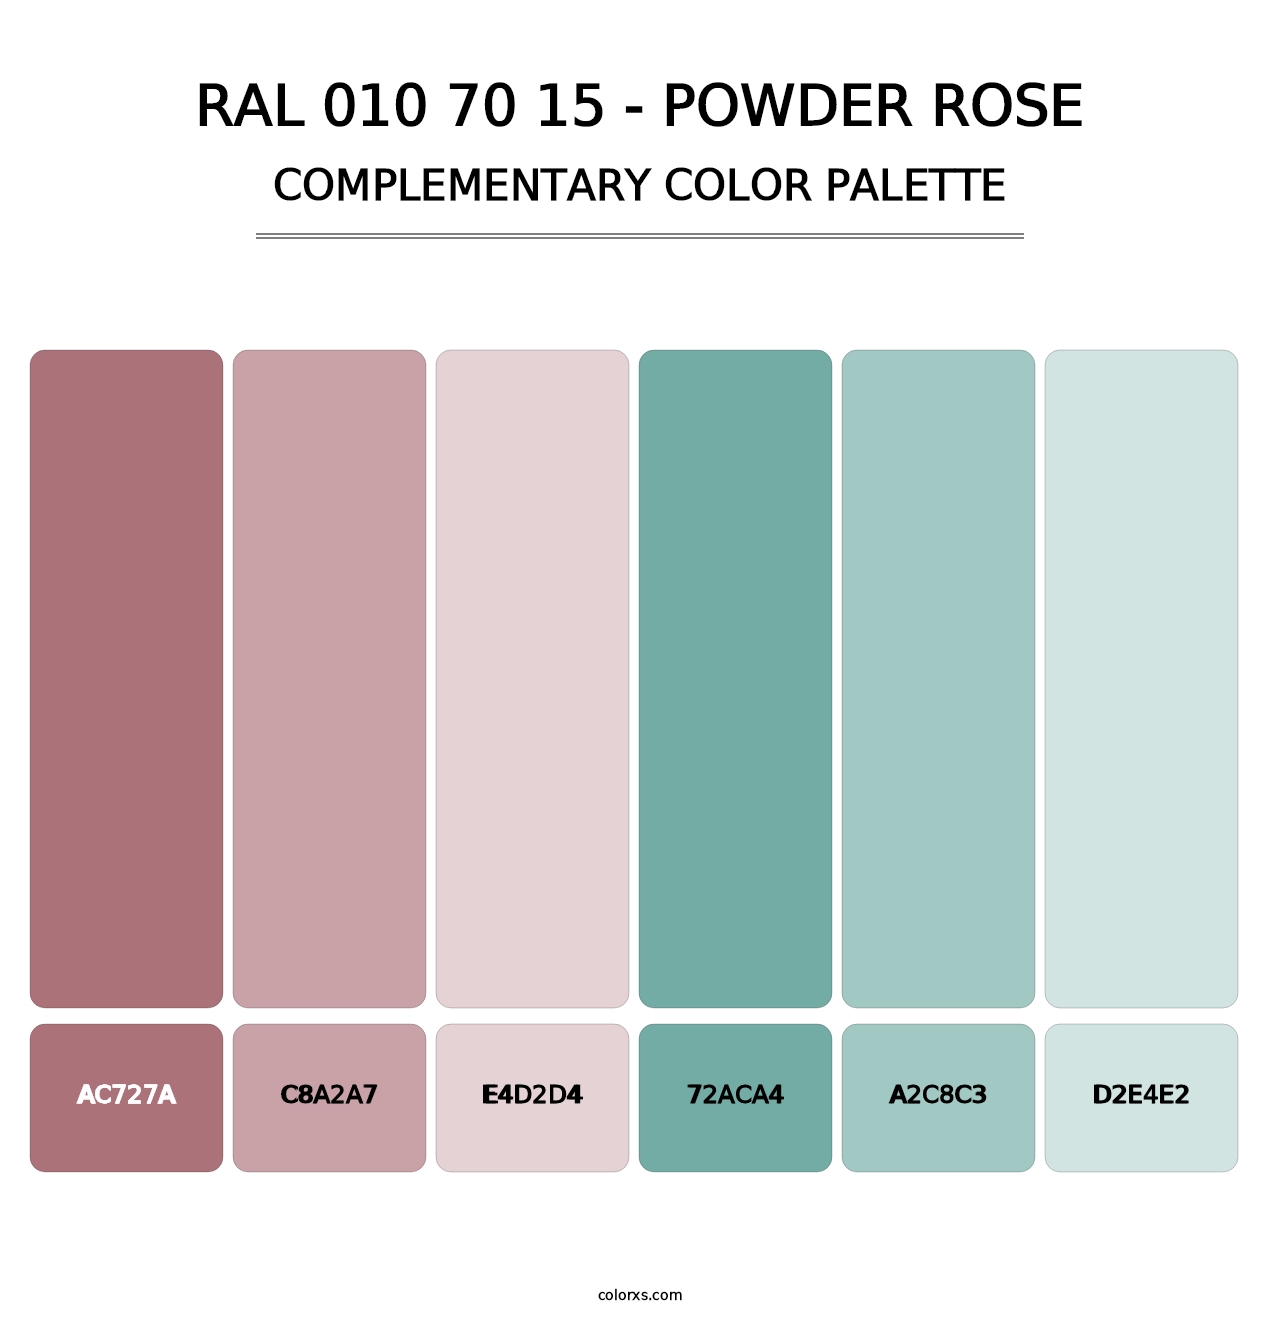 RAL 010 70 15 - Powder Rose - Complementary Color Palette